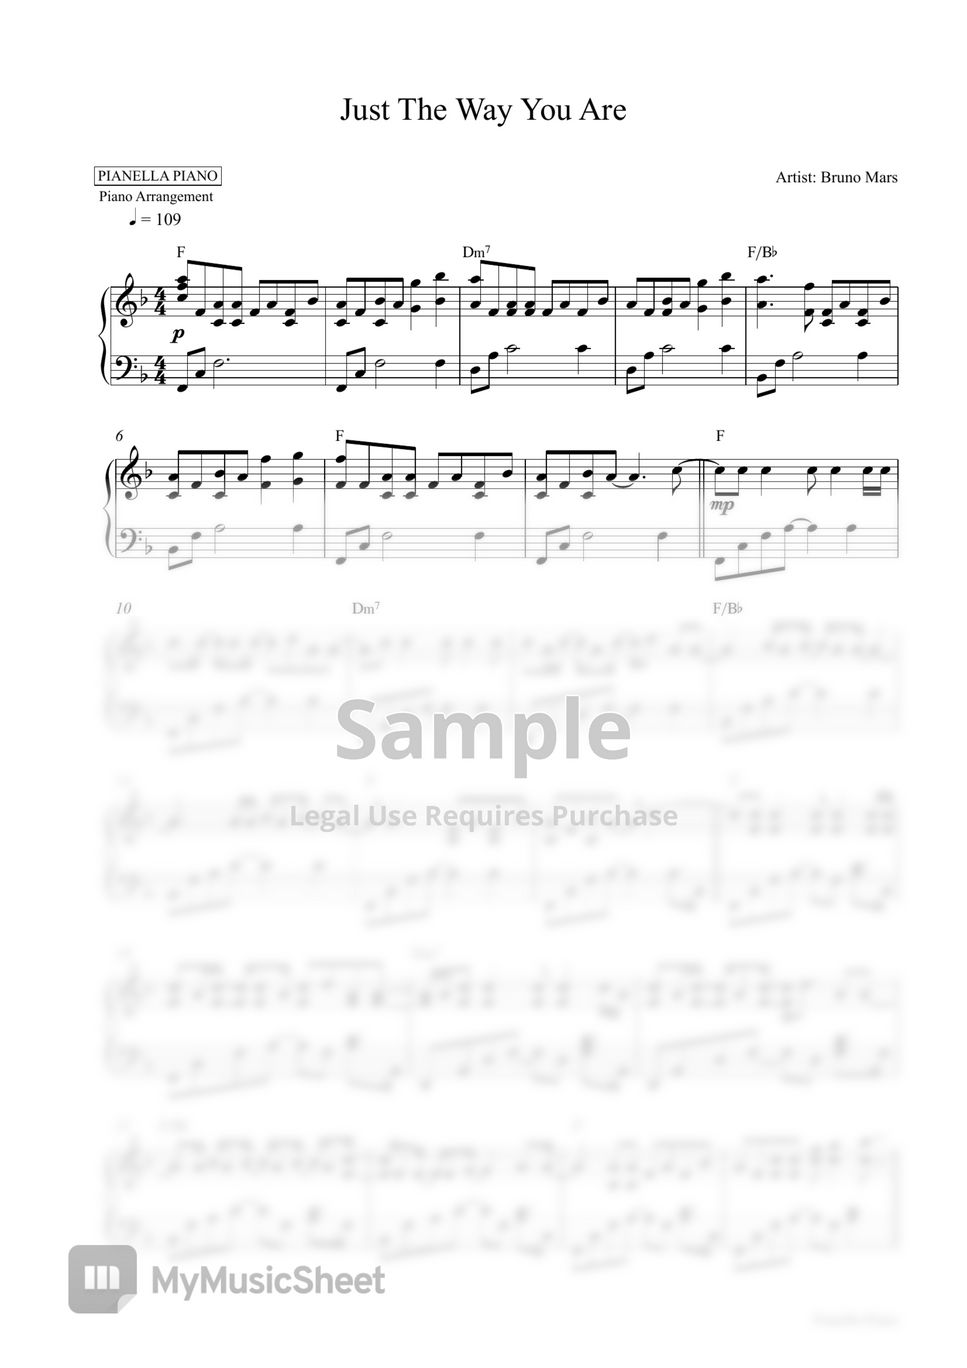 Bruno Mars - Just The Way You Are (Piano Sheet) by Pianella Piano